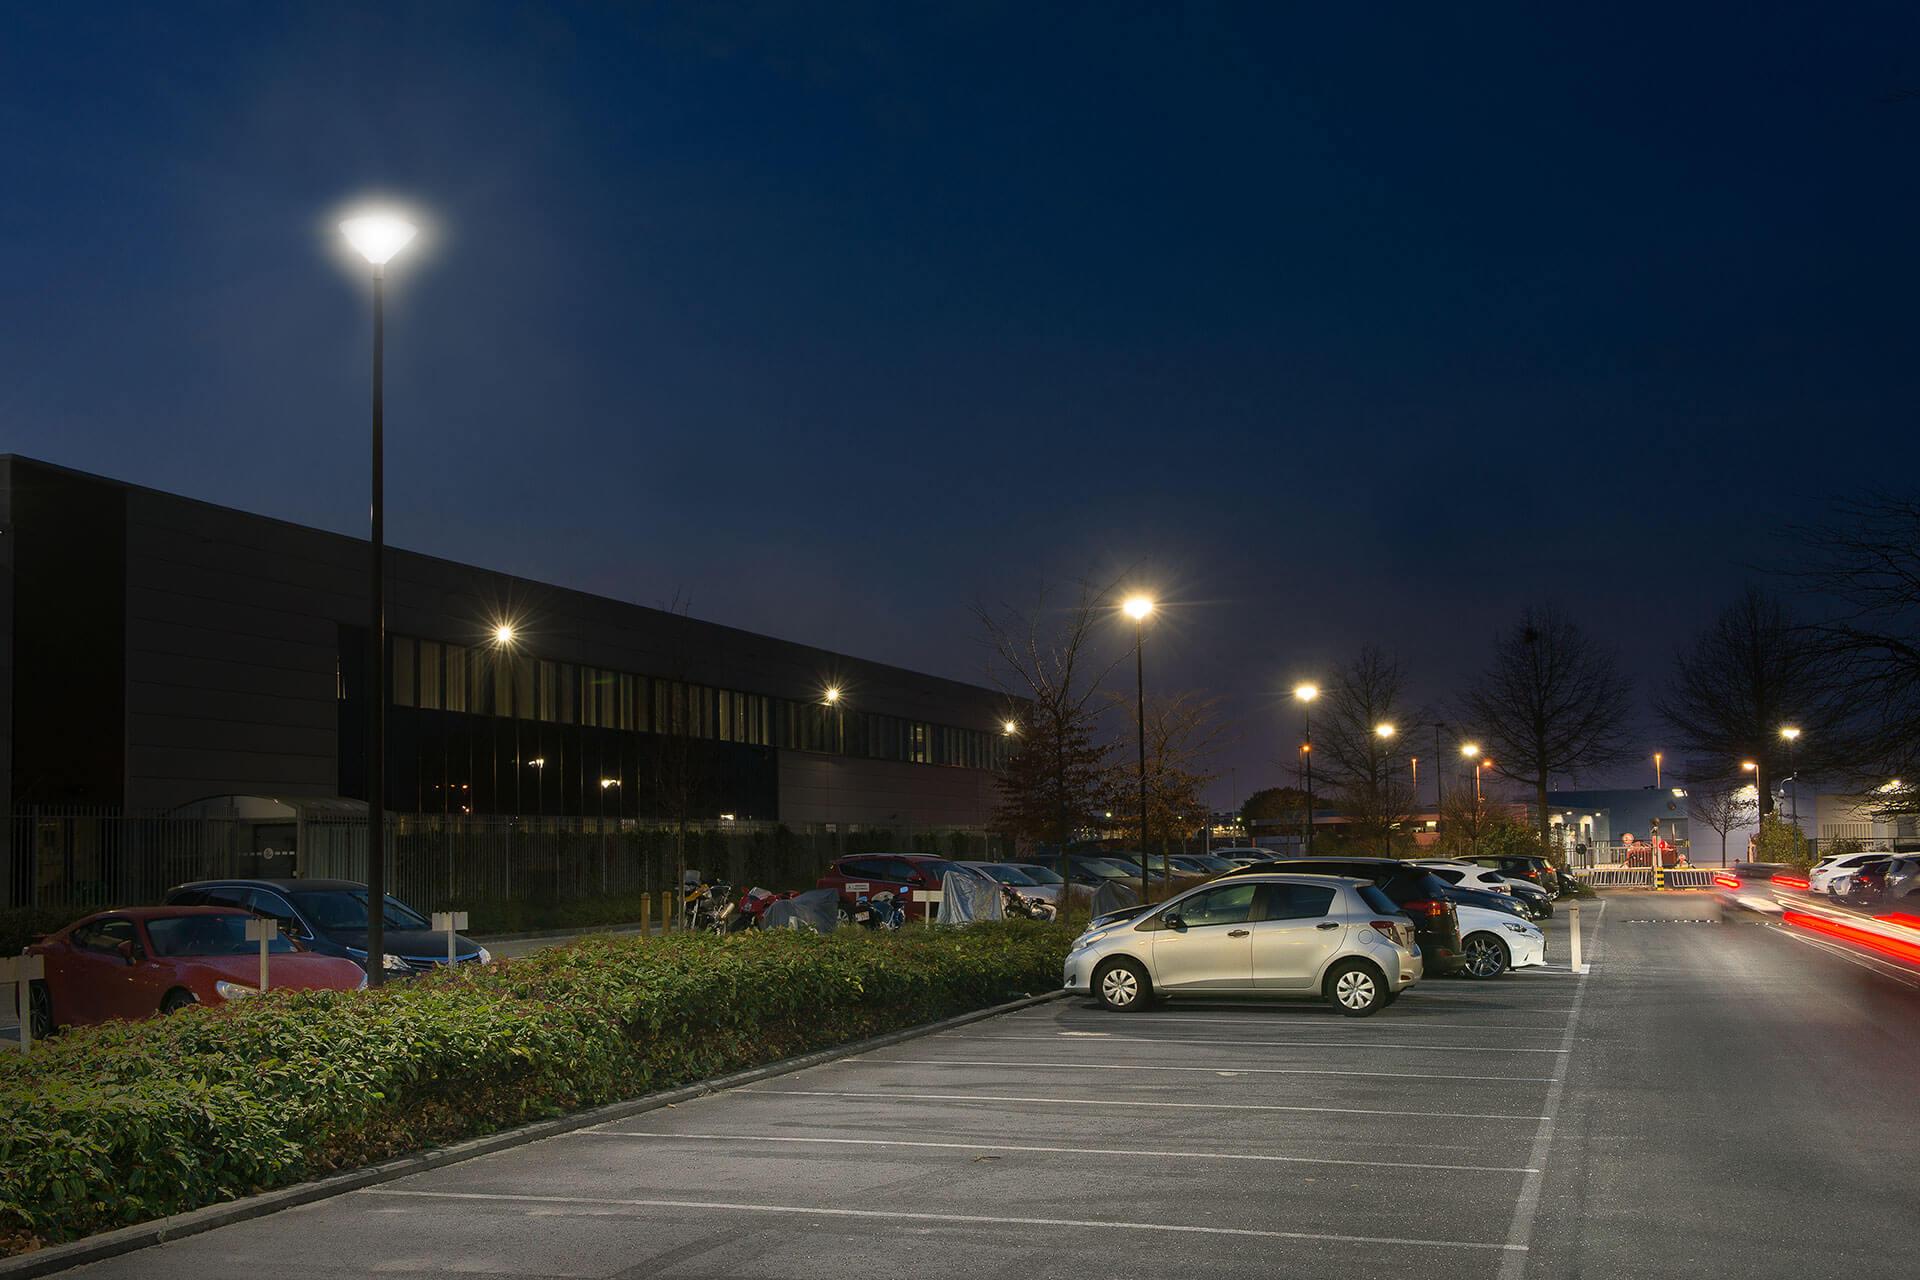 Friza led luminaire improves safety for employees and visitors with reduced energy costs